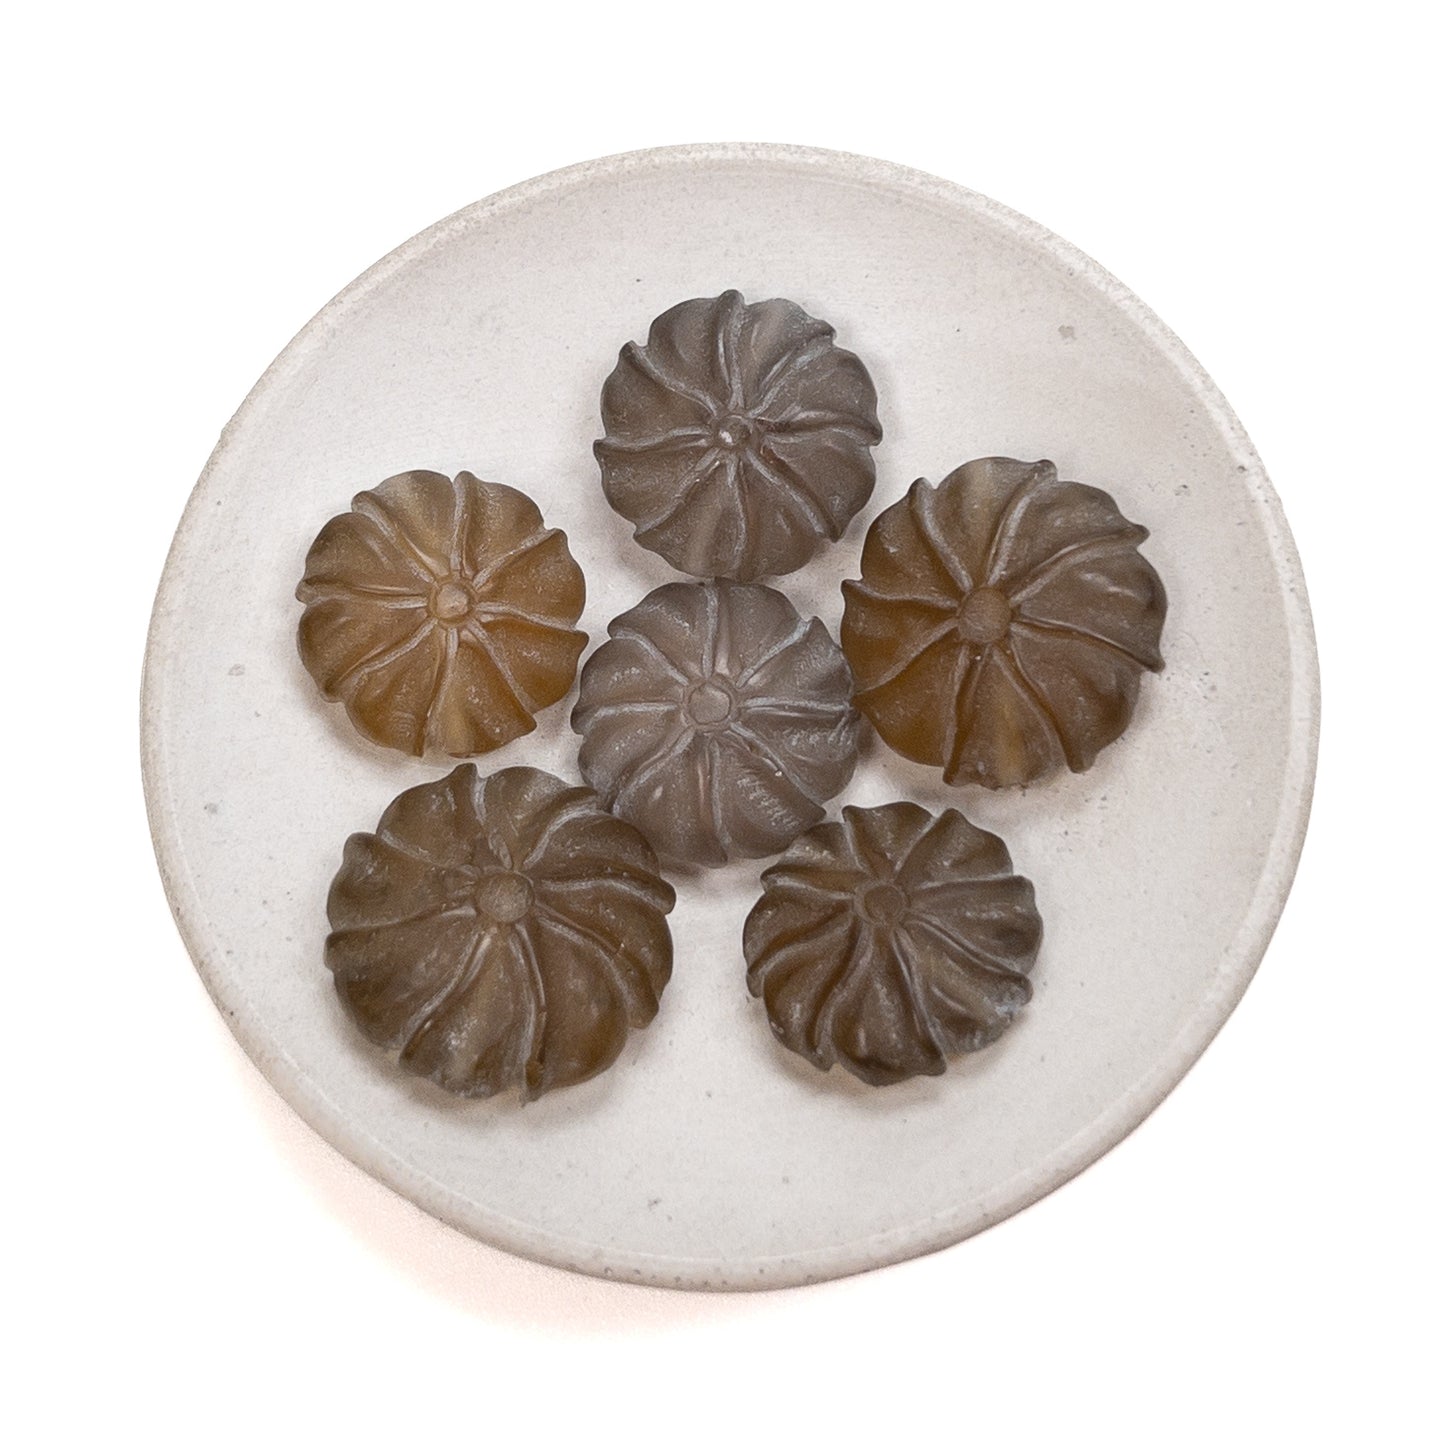 Mixed Quartz Matte Carved Floral Coin Bead (8 Stones Available, Size Varies) - 1 pc.